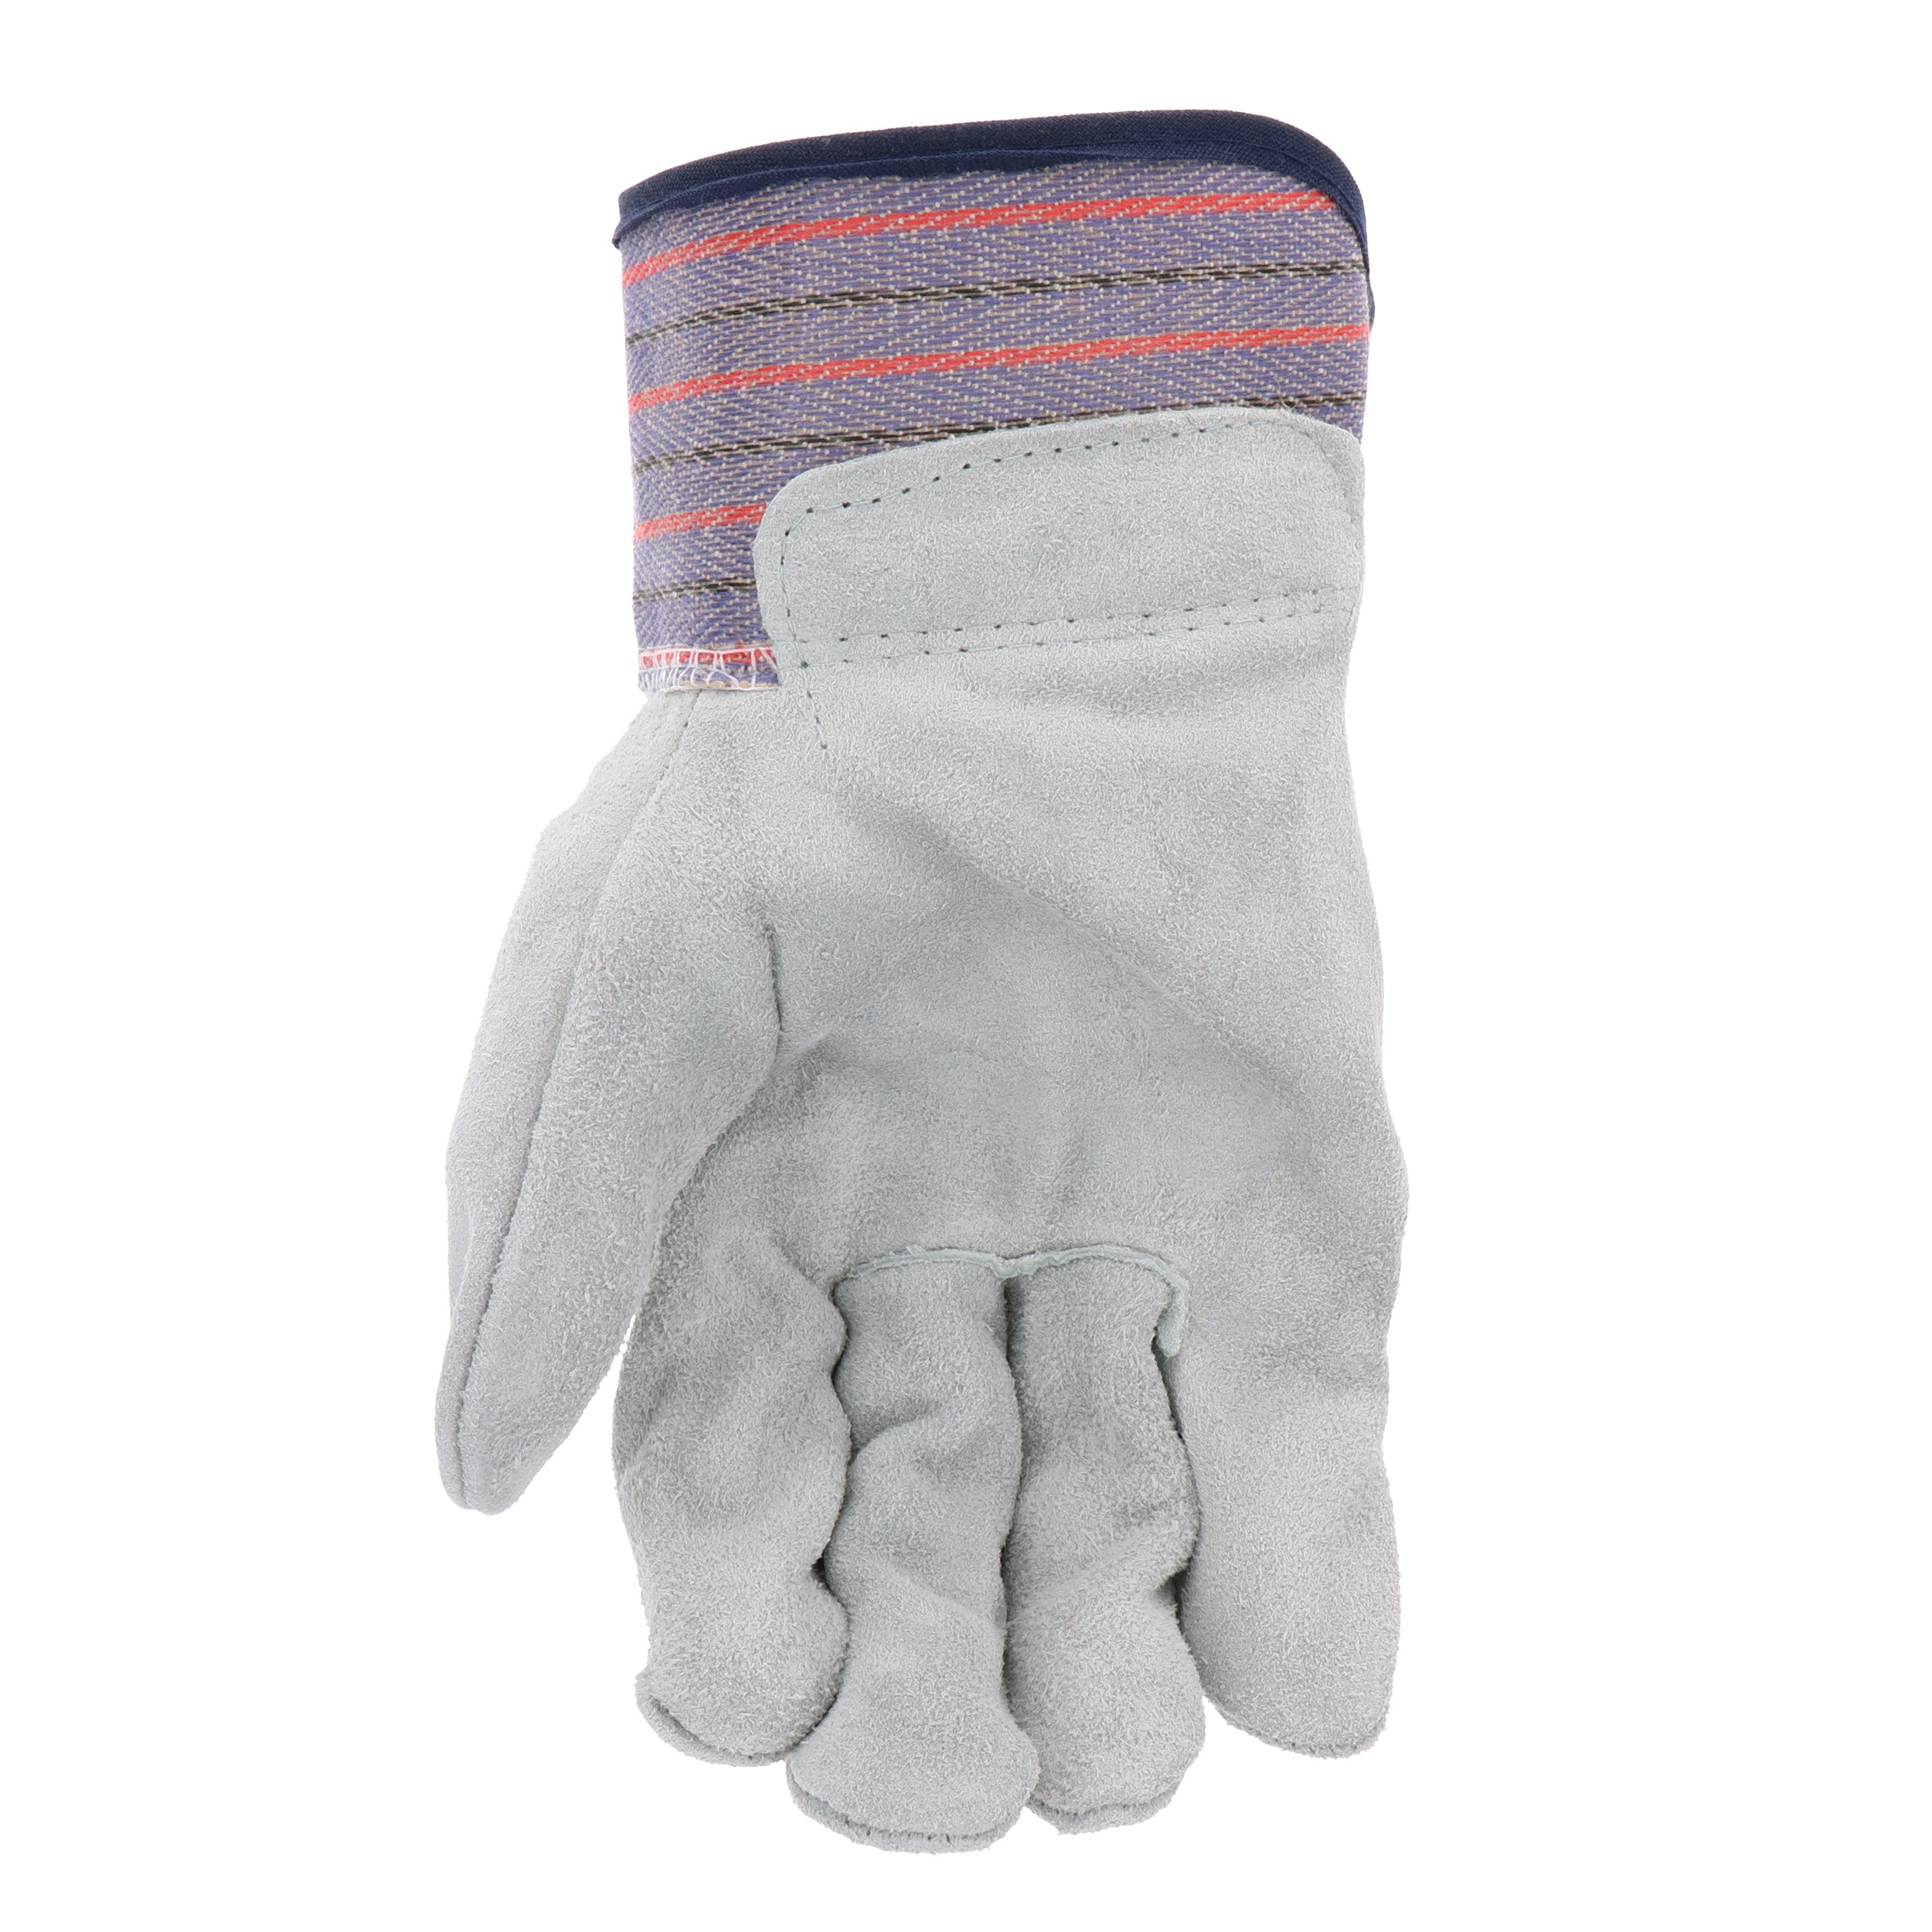 1/2 Pairs Pigskin Leather Work Gloves with Reinforced Palm for Yardwork Garden 